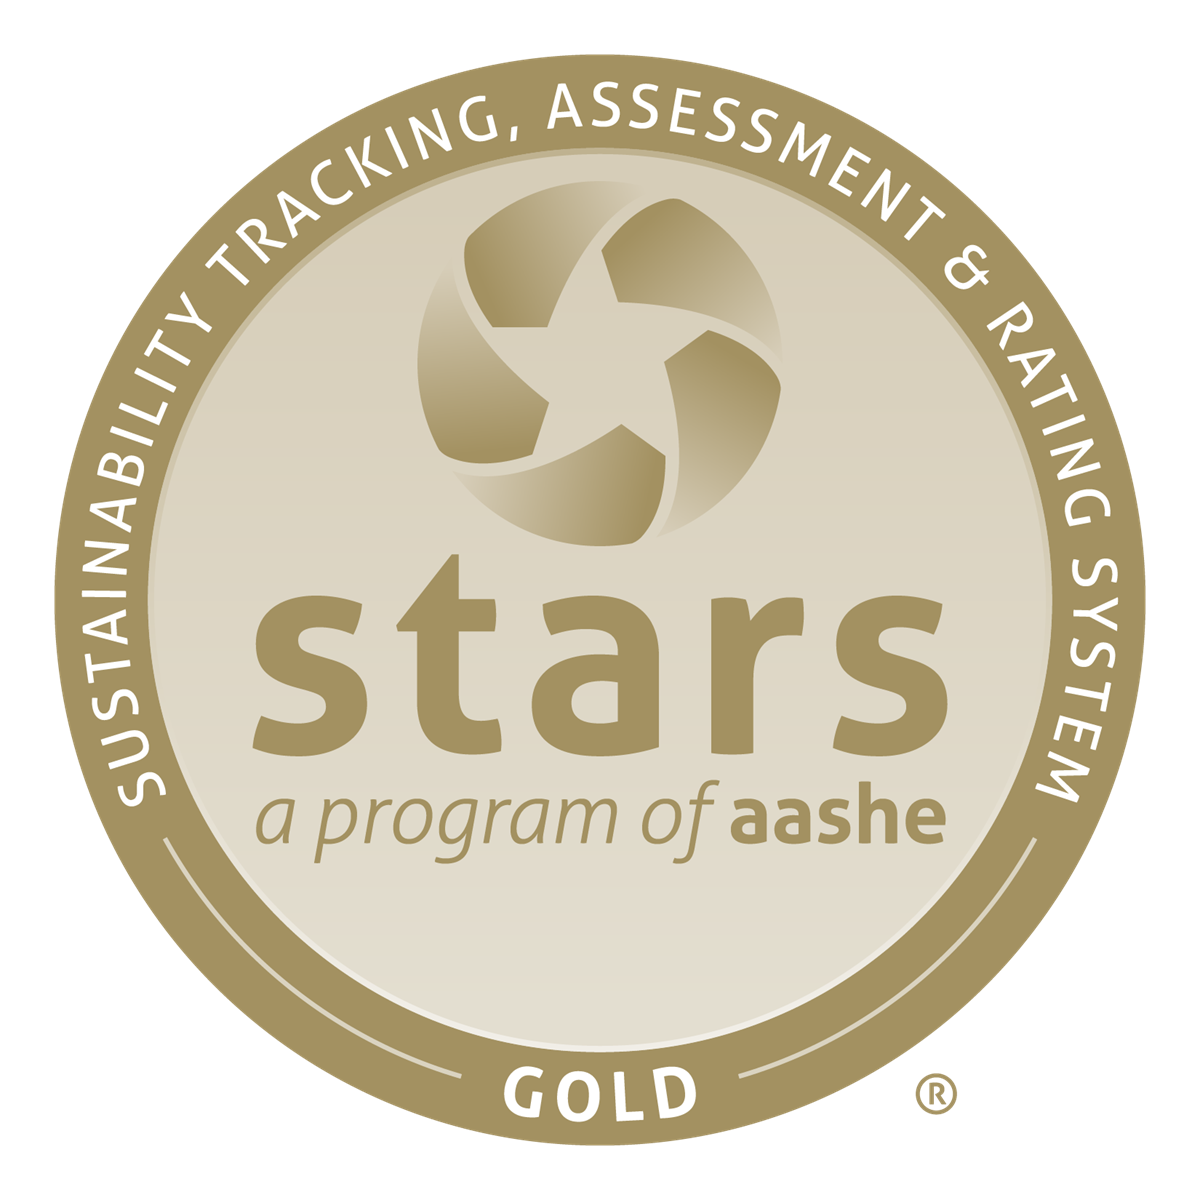 The Sustainability Tracking, Assessment & Rating System (STARS) is a transparent, self-reporting framework for colleges and universities to measure their sustainability performance